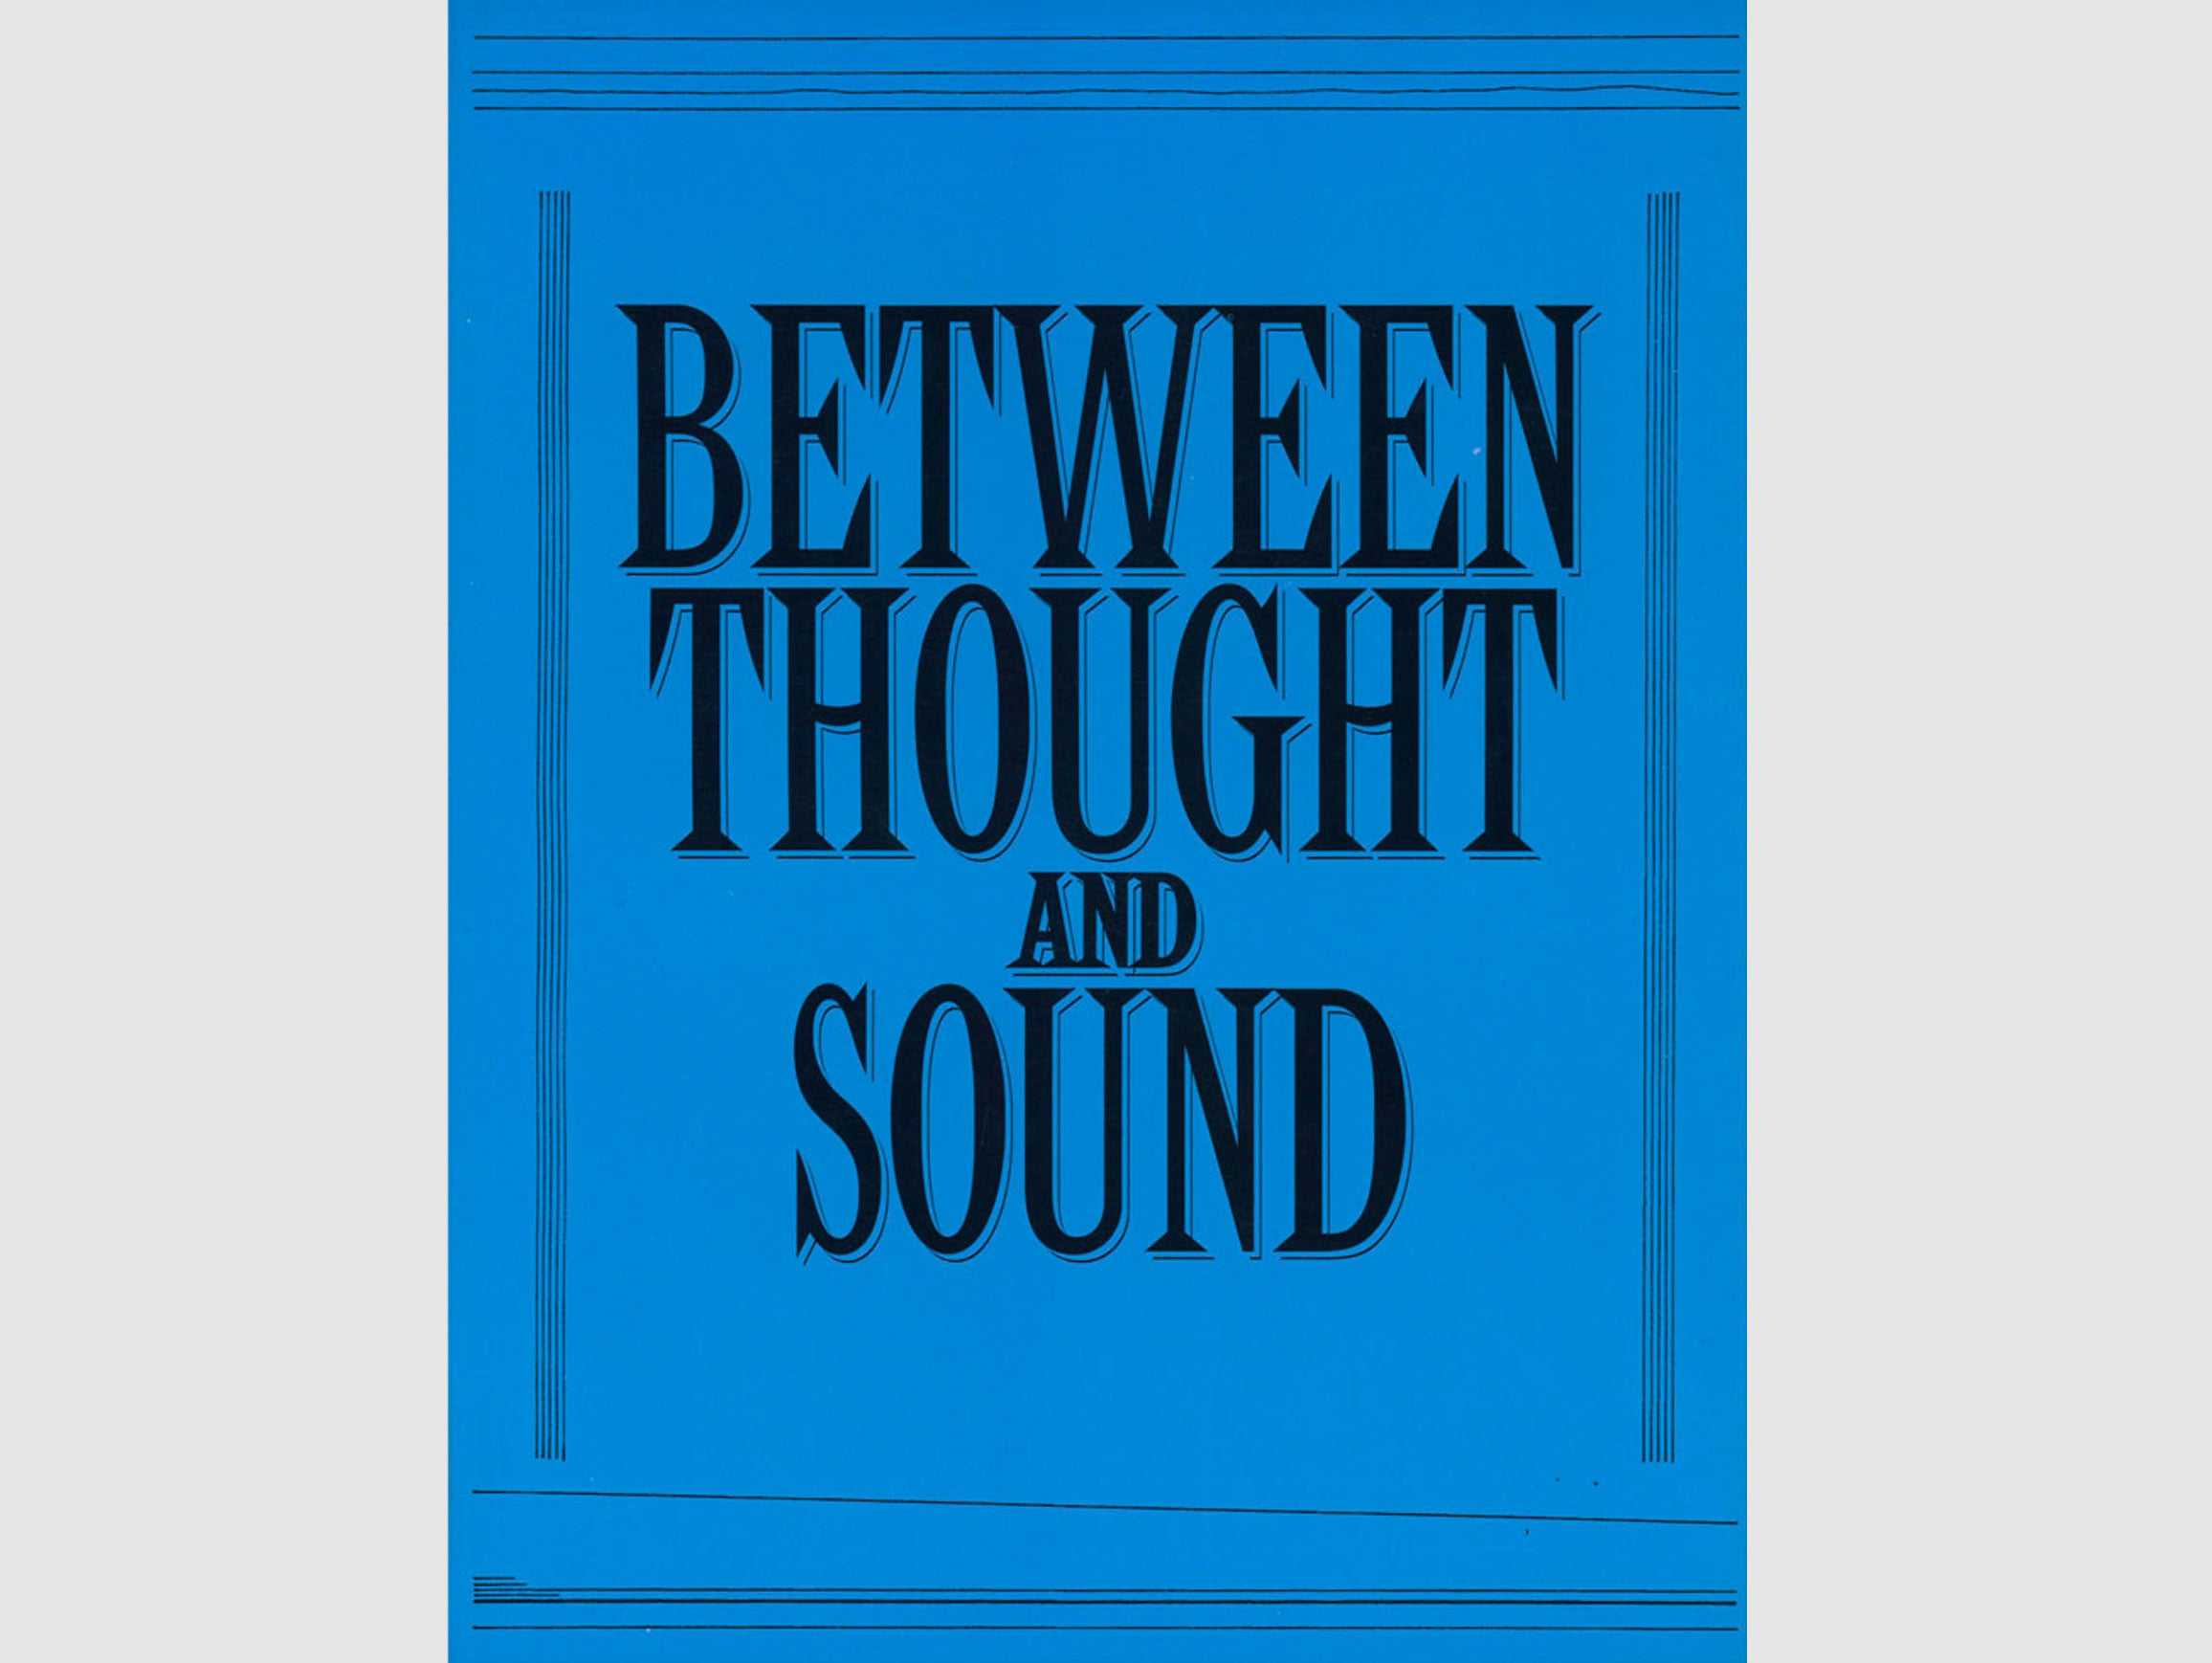 Between Thought and Sound